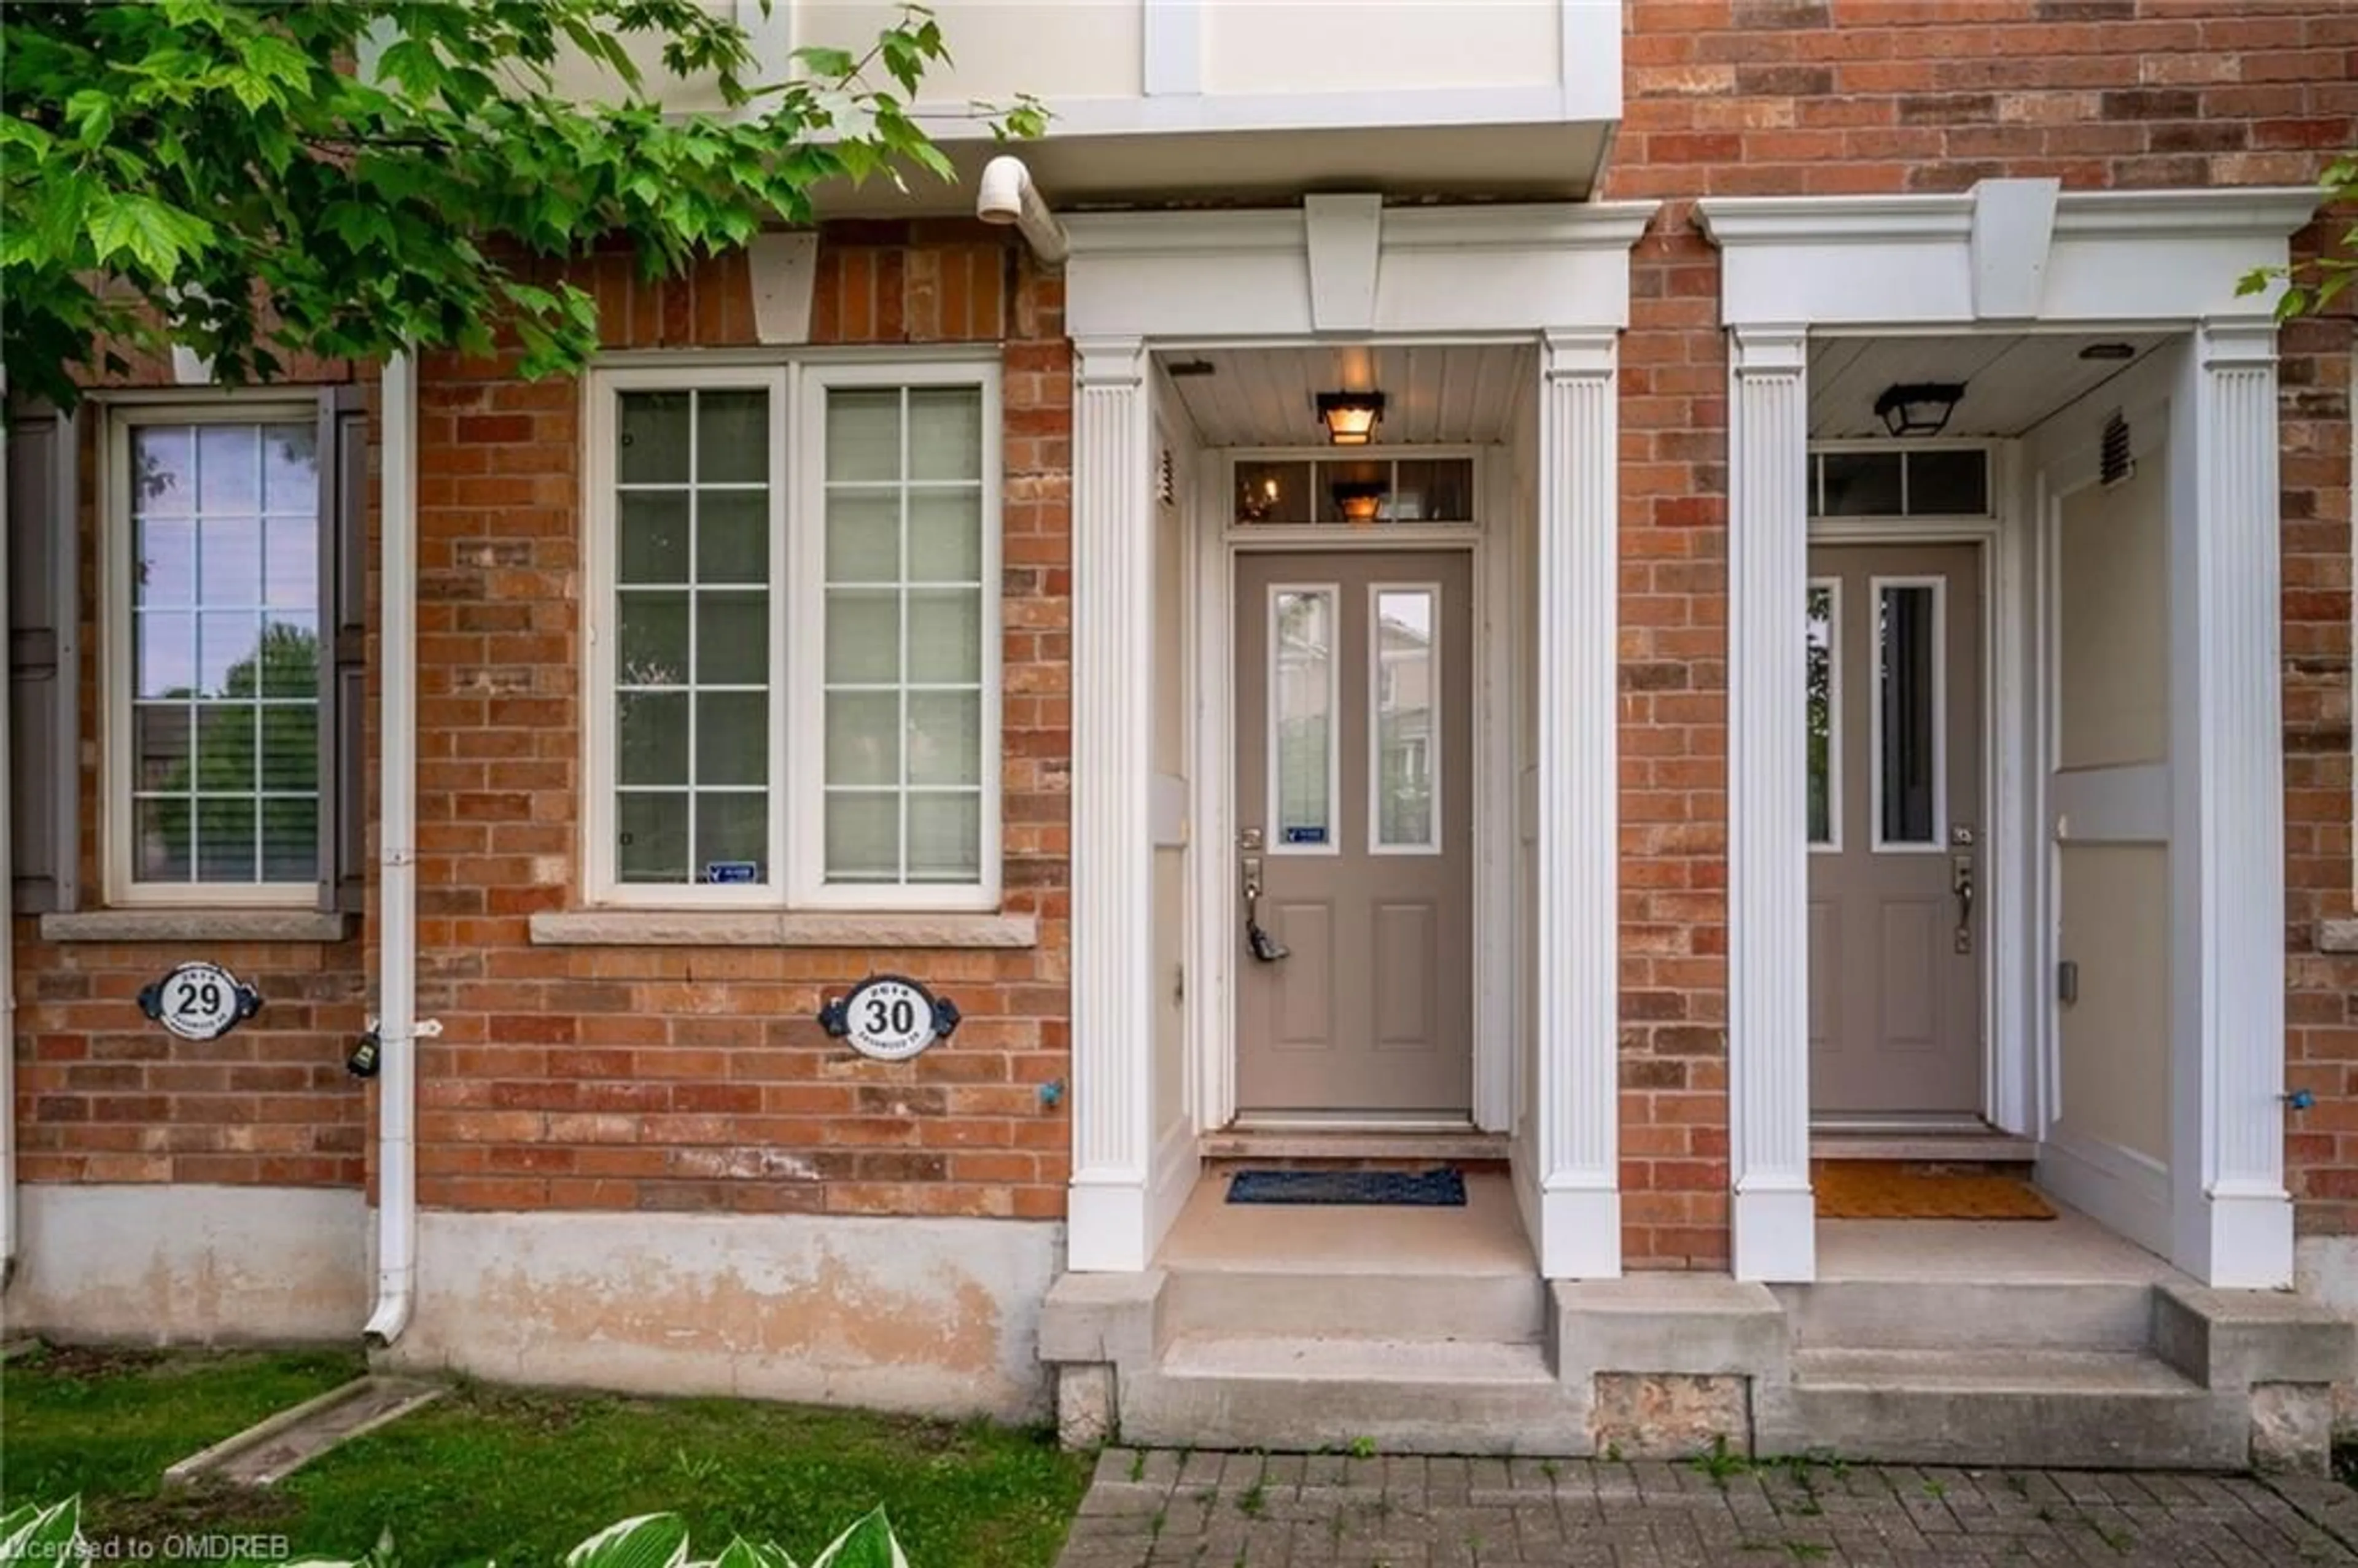 Home with brick exterior material for 2614 Dashwood Dr #30, Oakville Ontario L6M 0K5